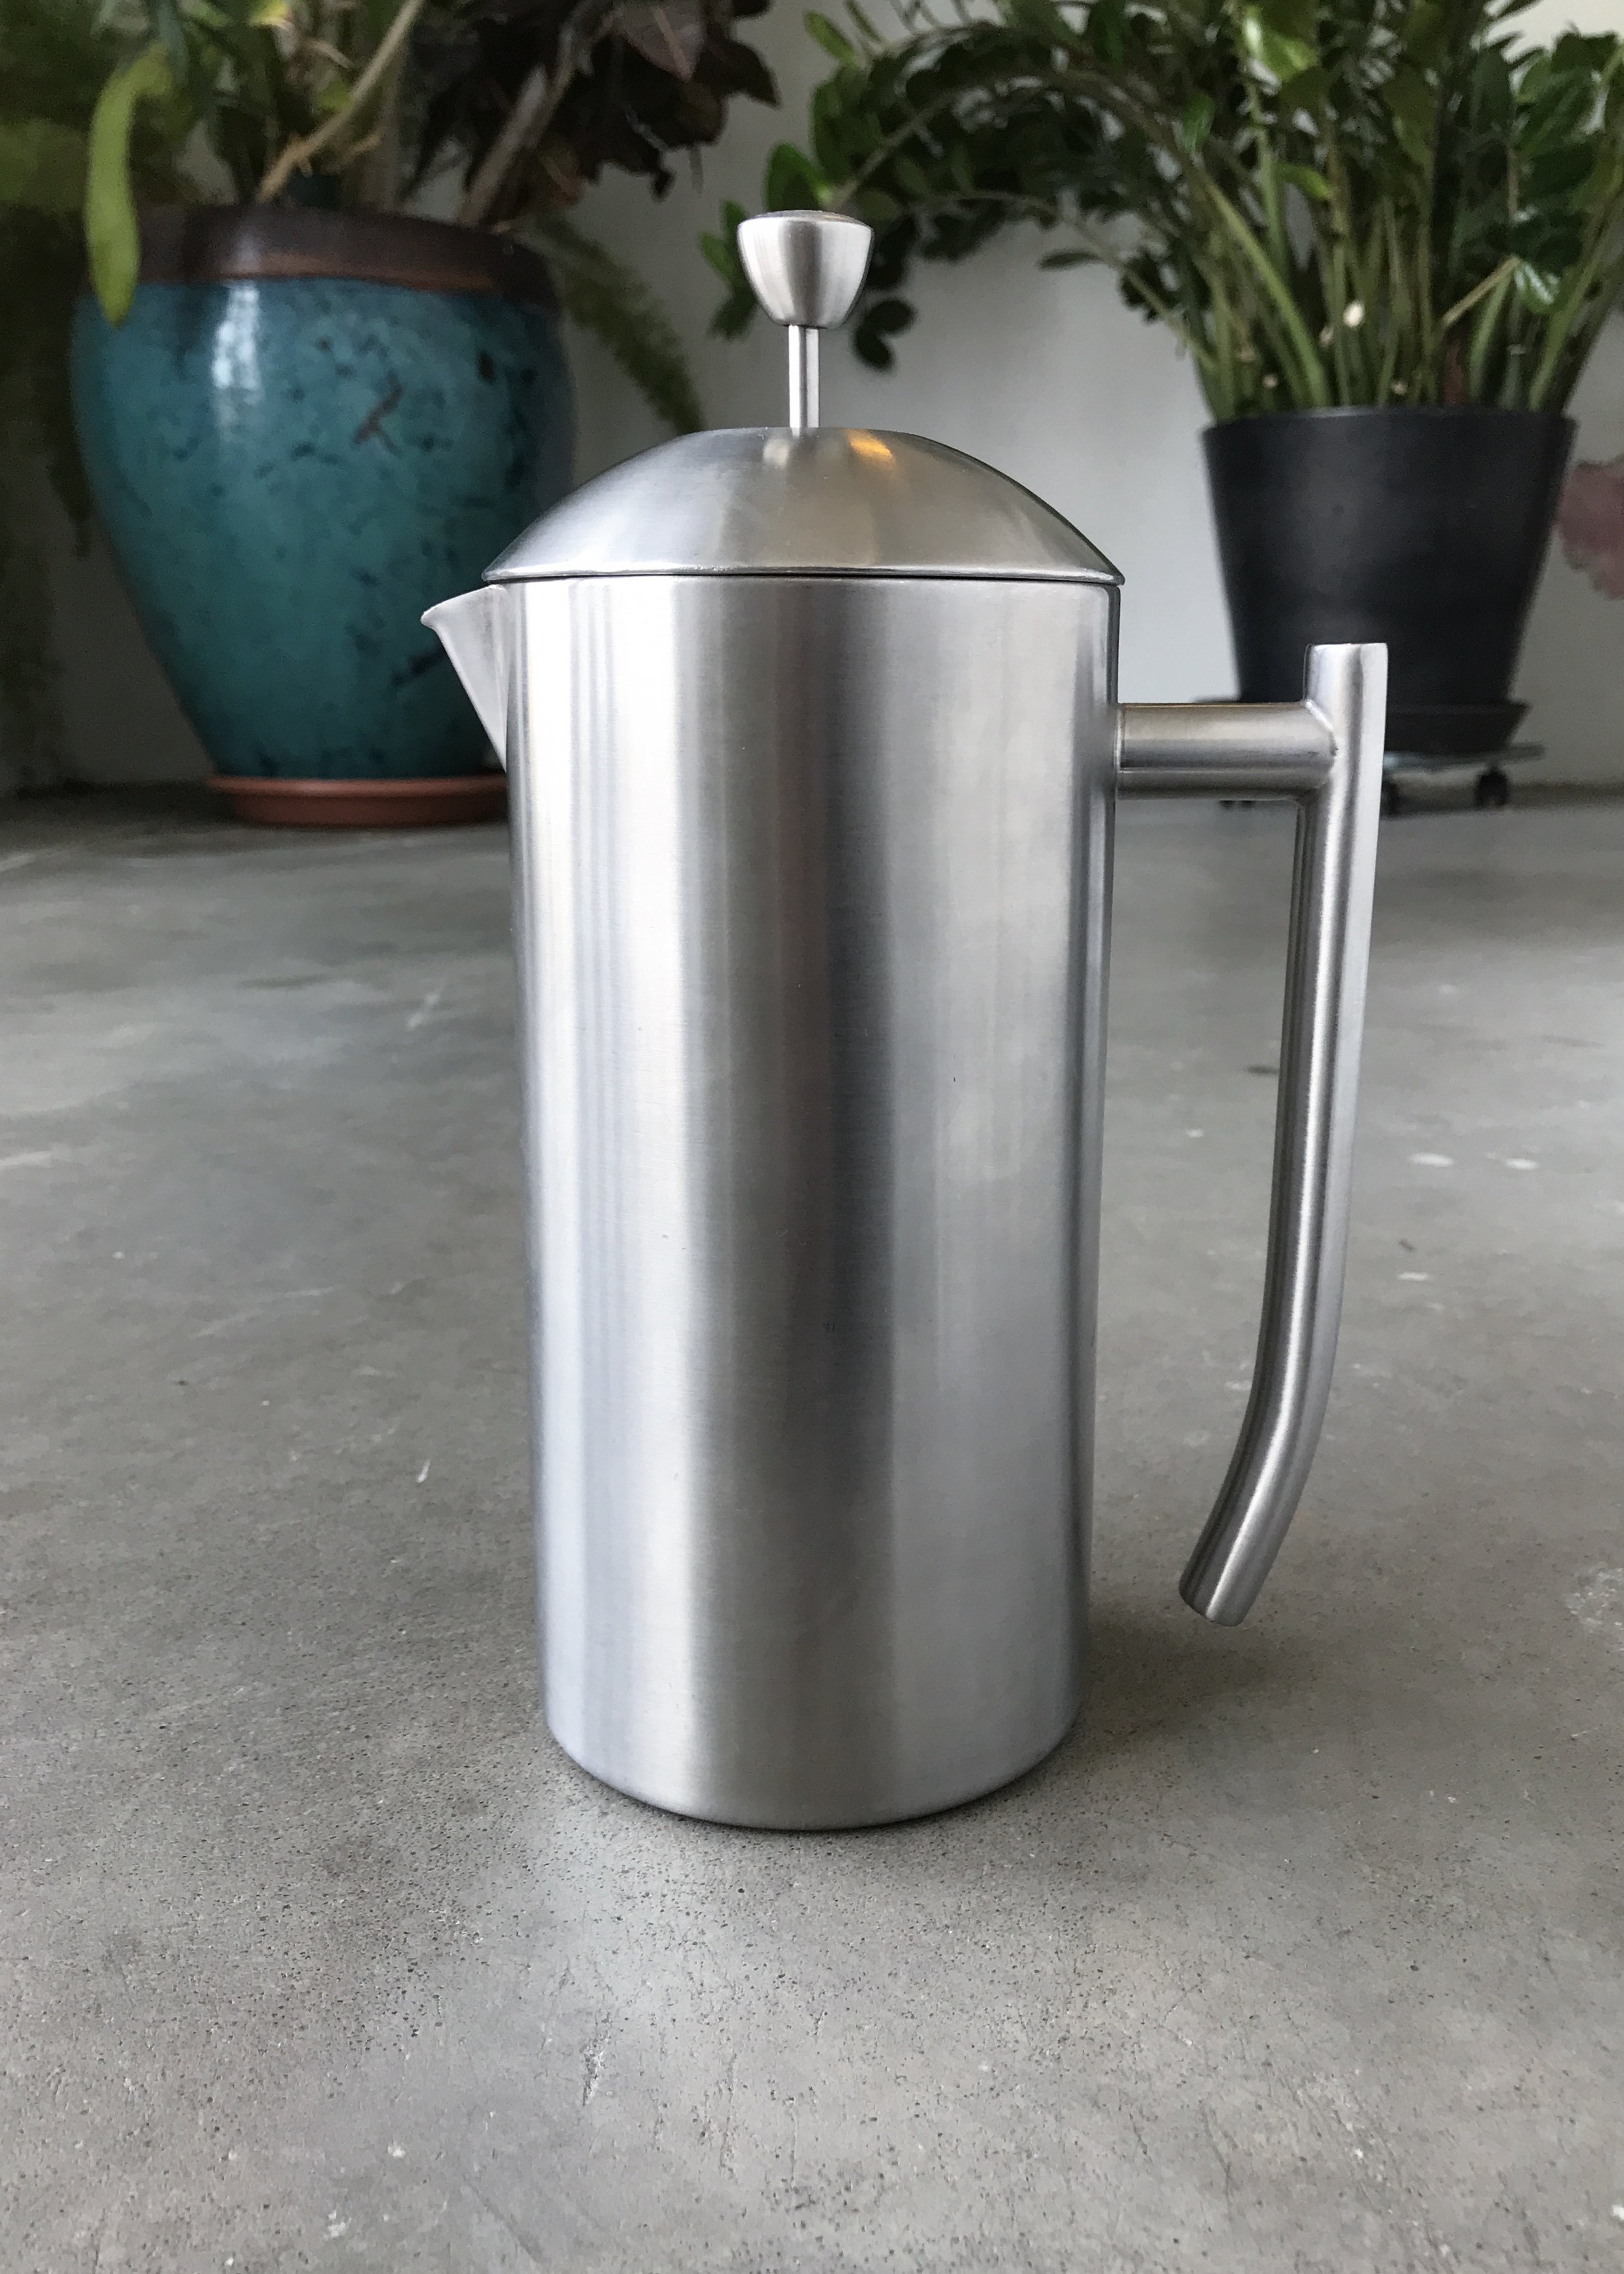 Frieling French Press - Double Wall, Stainless Steel with with